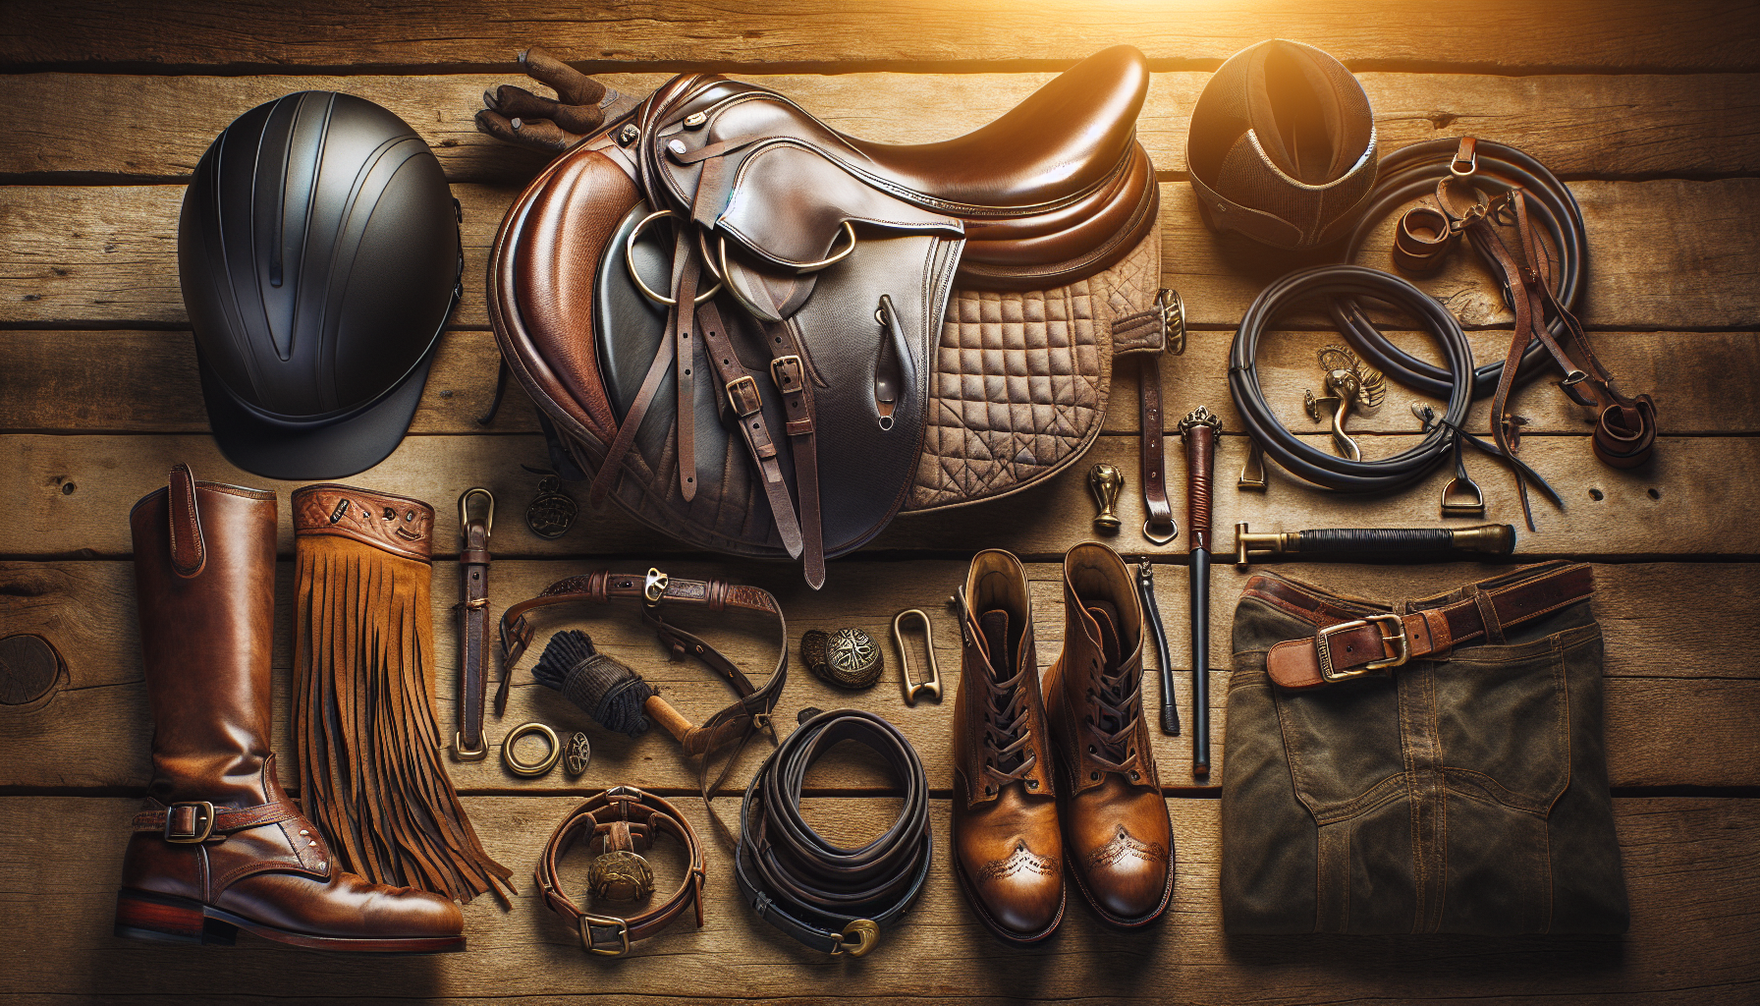 Create an image showcasing the essential equestrian gear recommended for trail riding. The items should include, but are not limited to, a durable saddle, leather bridle, helmet for safety, riding boo